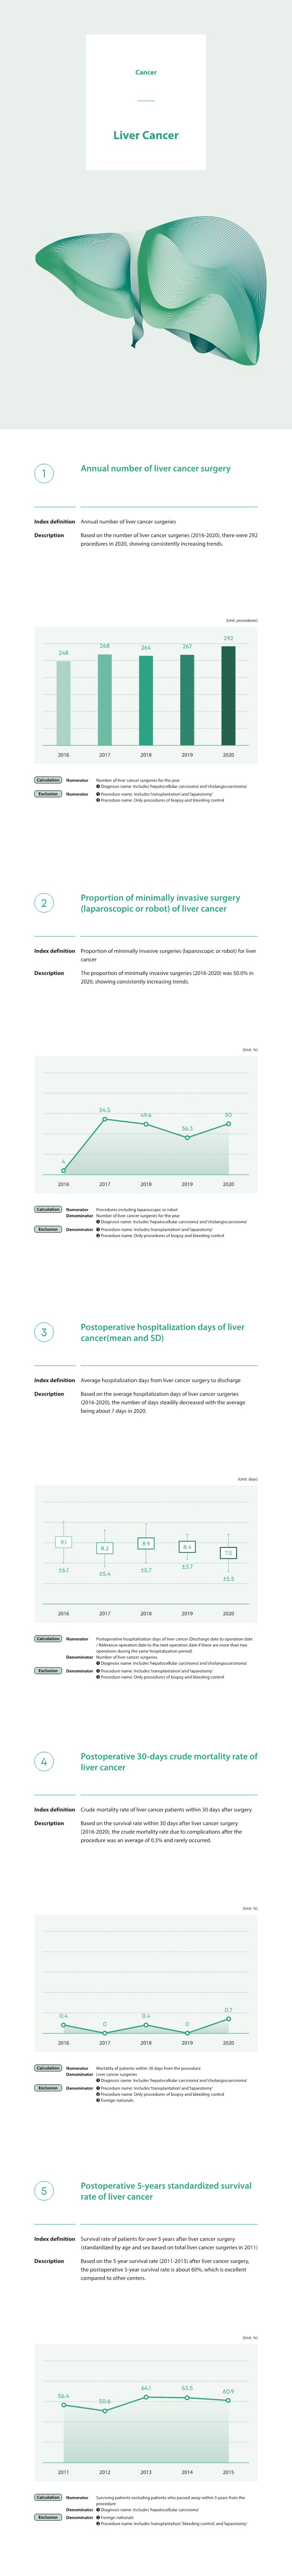 liver cancer, Annual number of liver cancer surgeries, Based on the number of liver cancer surgeries (2016-2020), there were 292 procedures in 2020, showing consistently increasing trends.